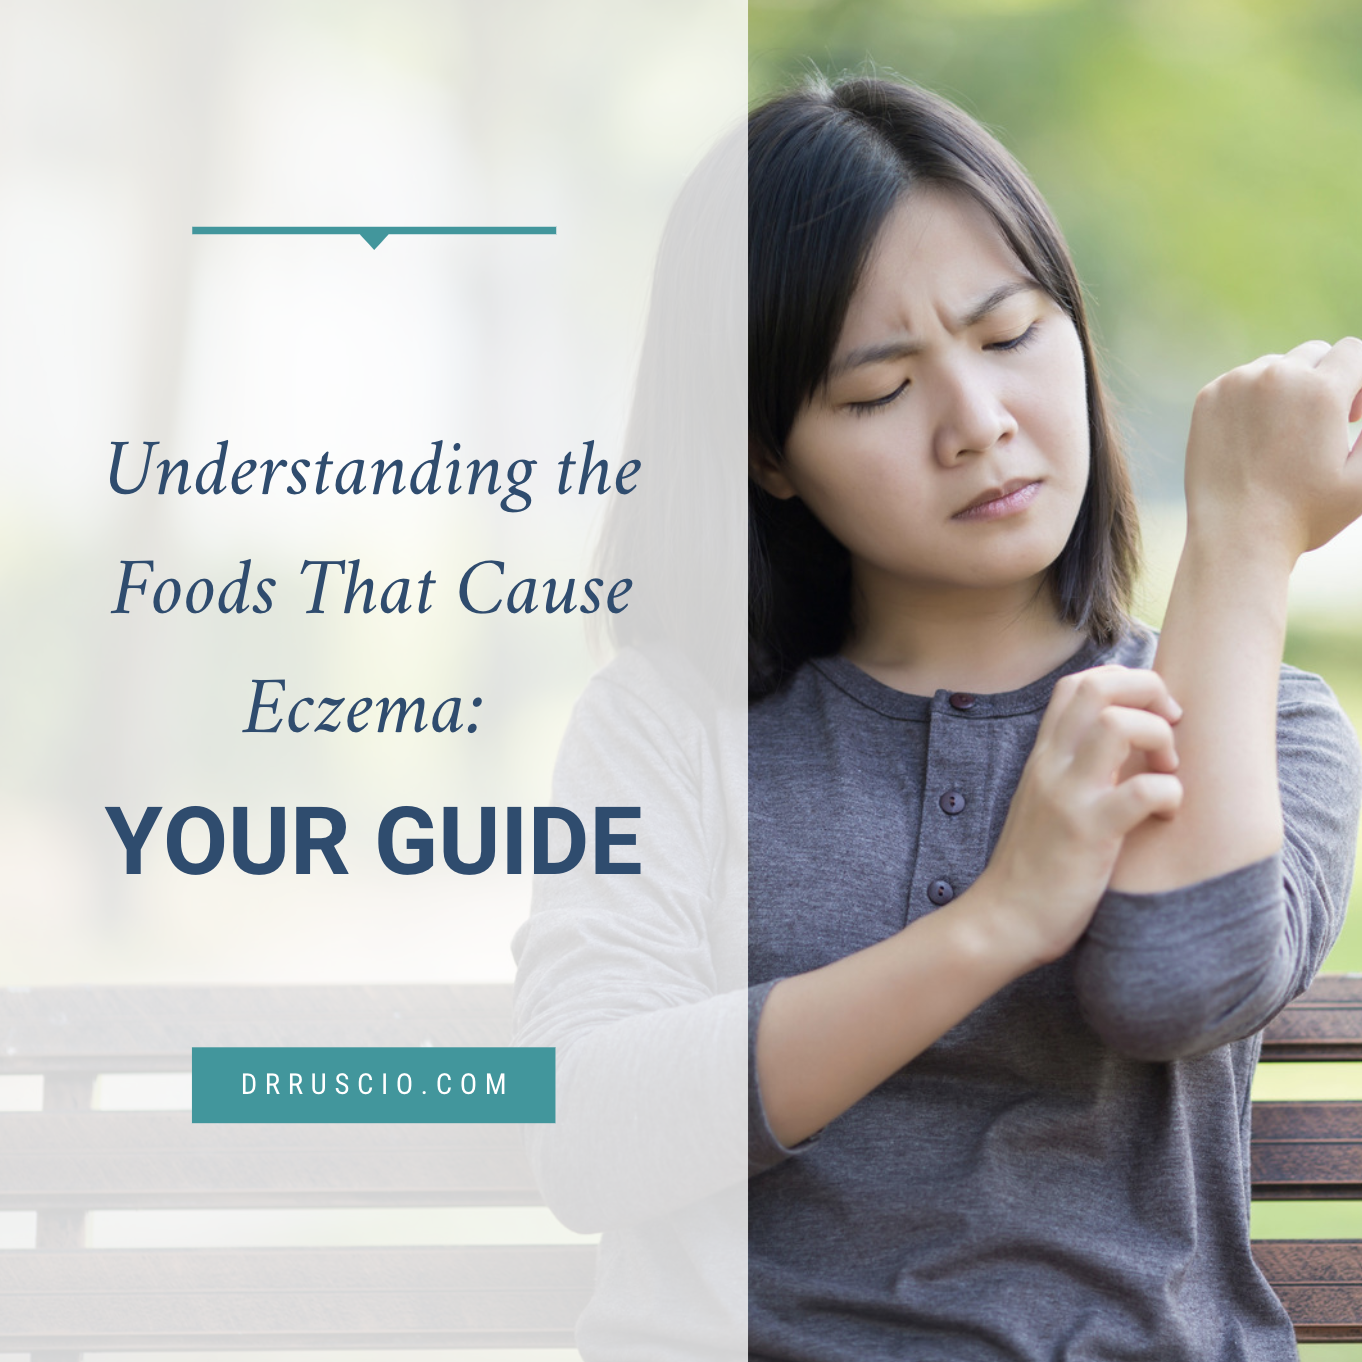 Understanding the Foods That Cause Eczema: Your Guide